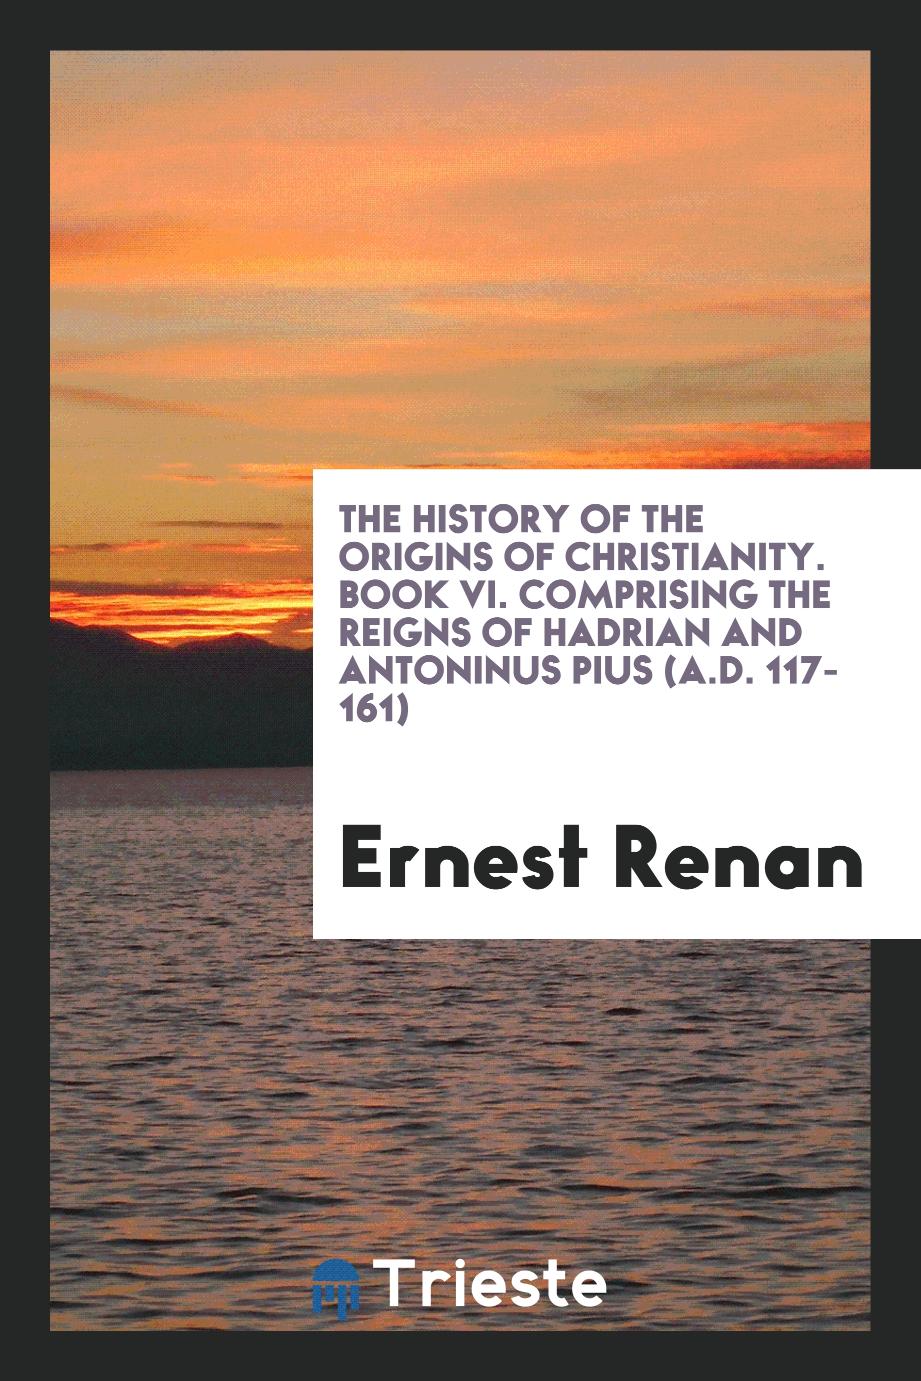 The History of the Origins of Christianity. Book VI. Comprising the Reigns of Hadrian and Antoninus Pius (A.D. 117-161)